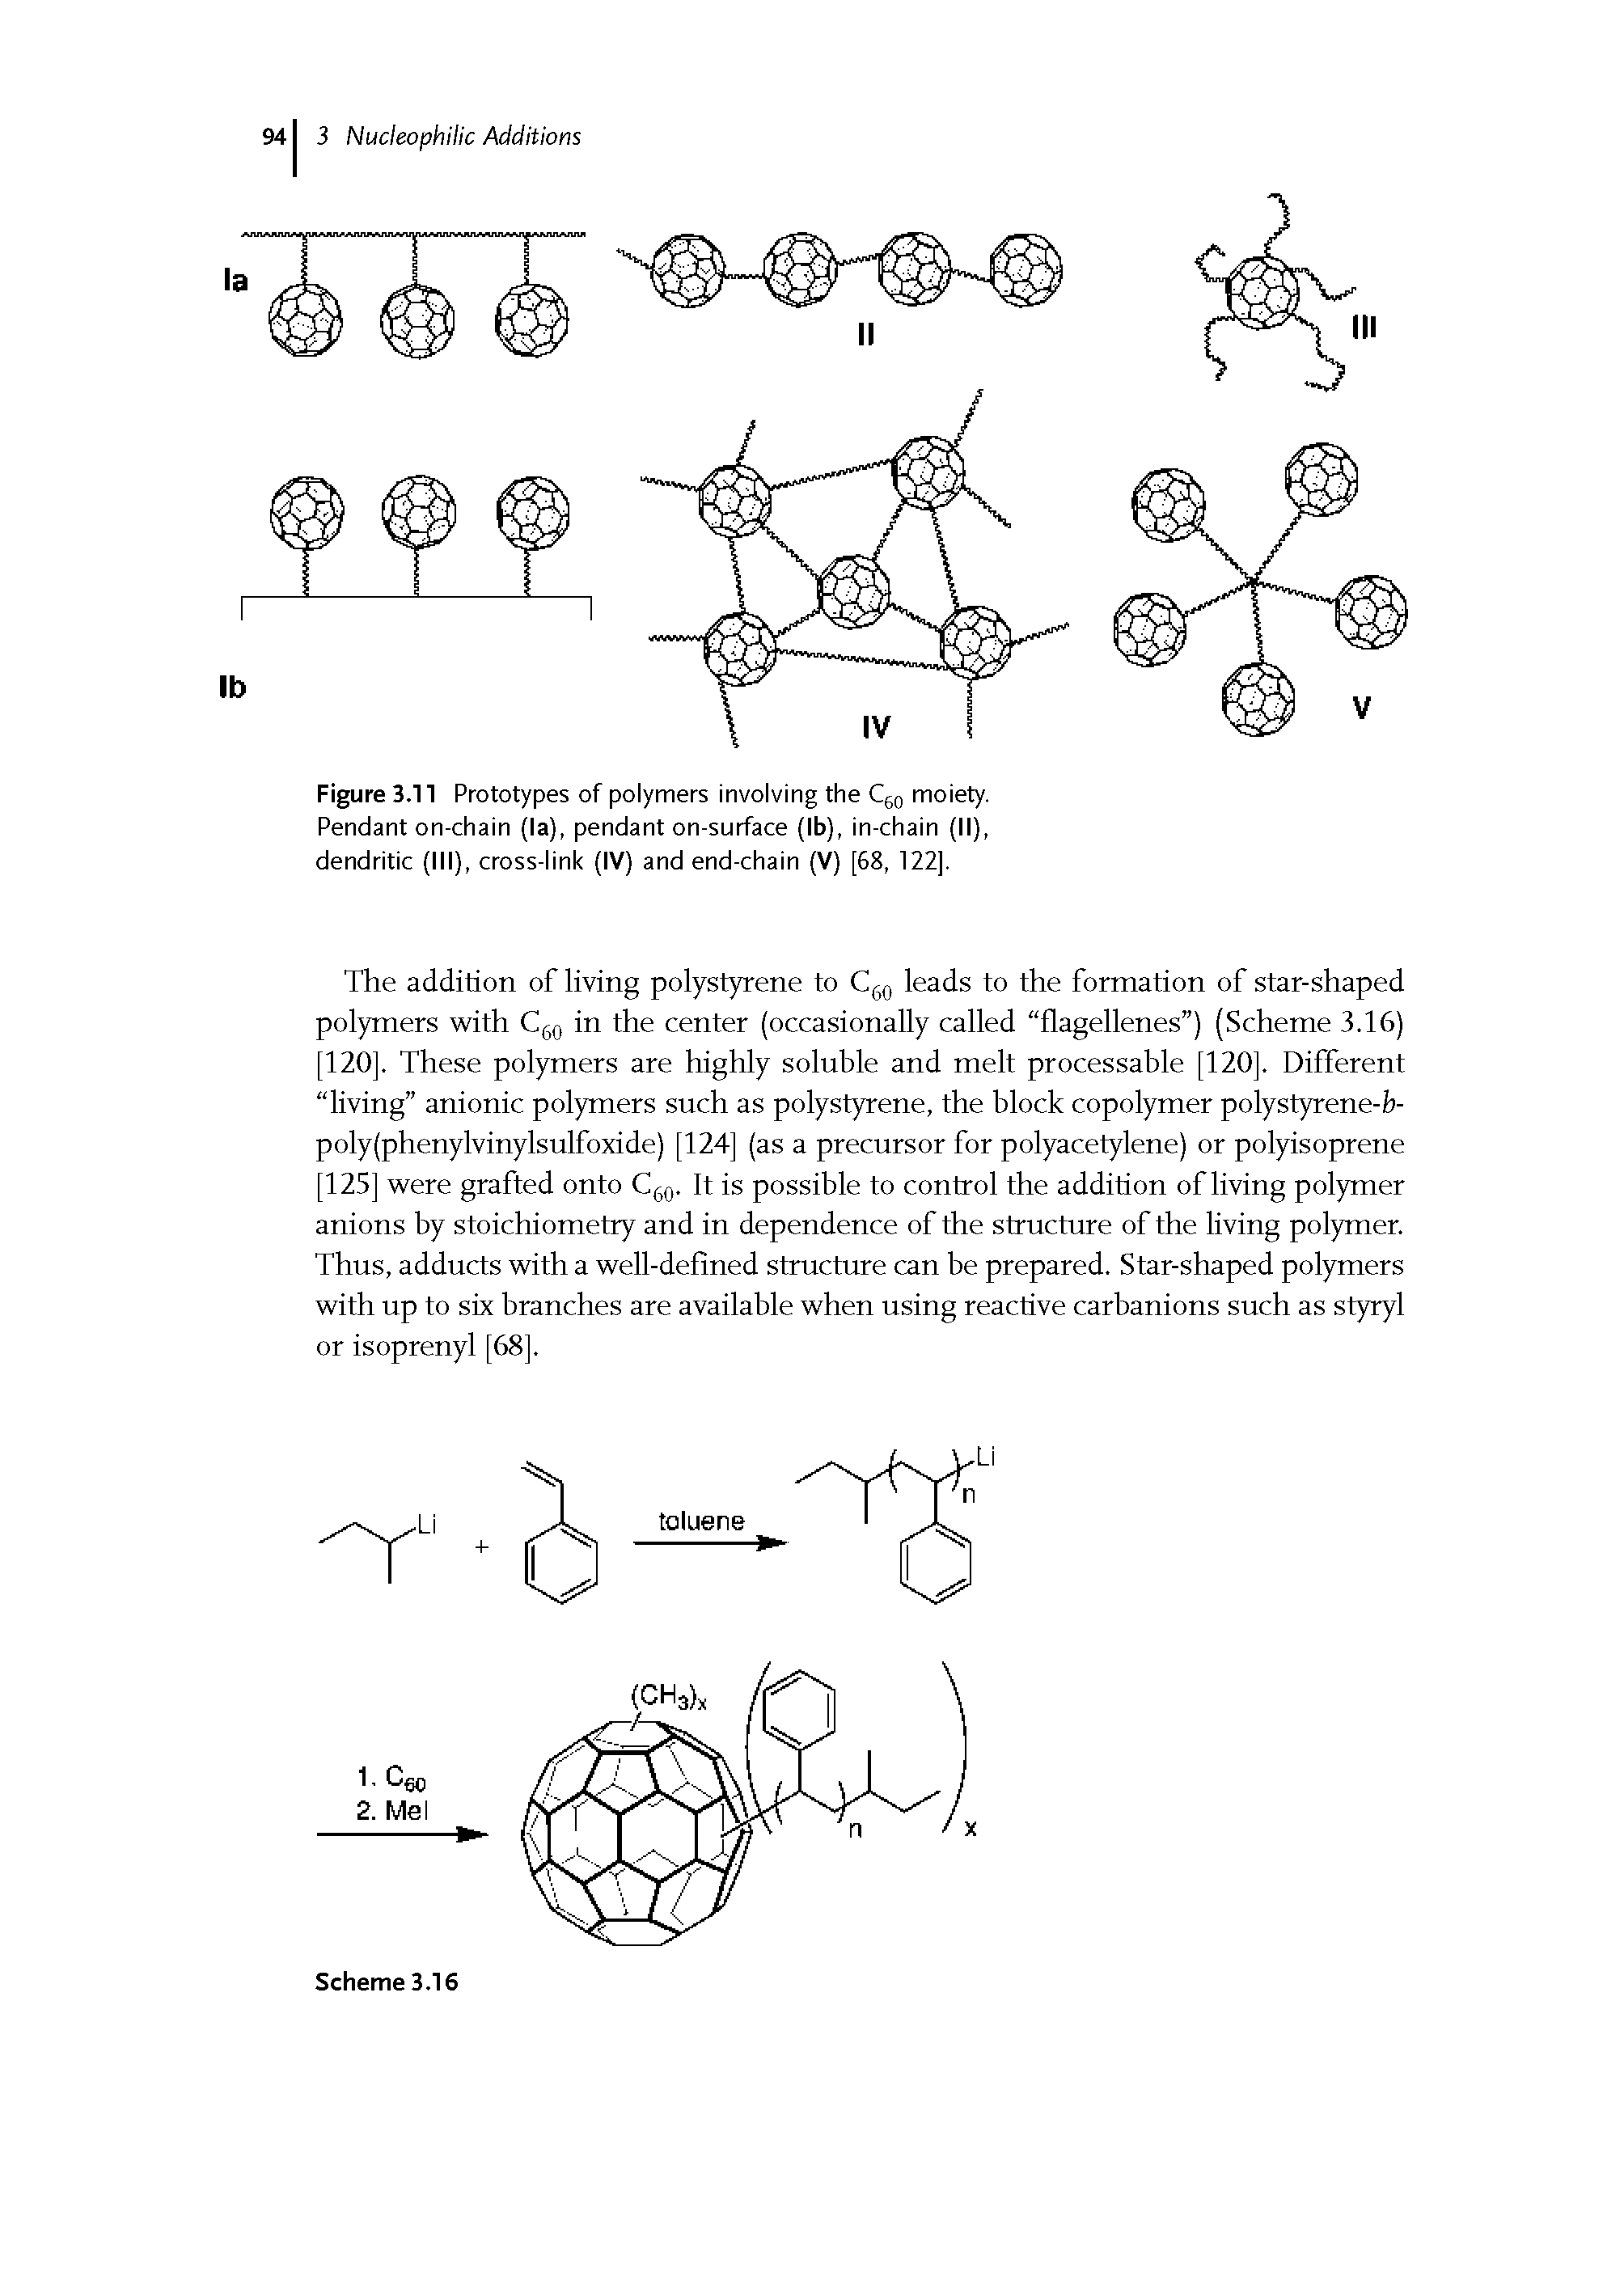 Figure 3.11 Prototypes of polymers involving the Qq tnoiety. Pendant on-chain (la), pendant on-surface (lb), in-chain (II), dendritic (III), cross-link (IV) and end-chain (V) [68, 122],...